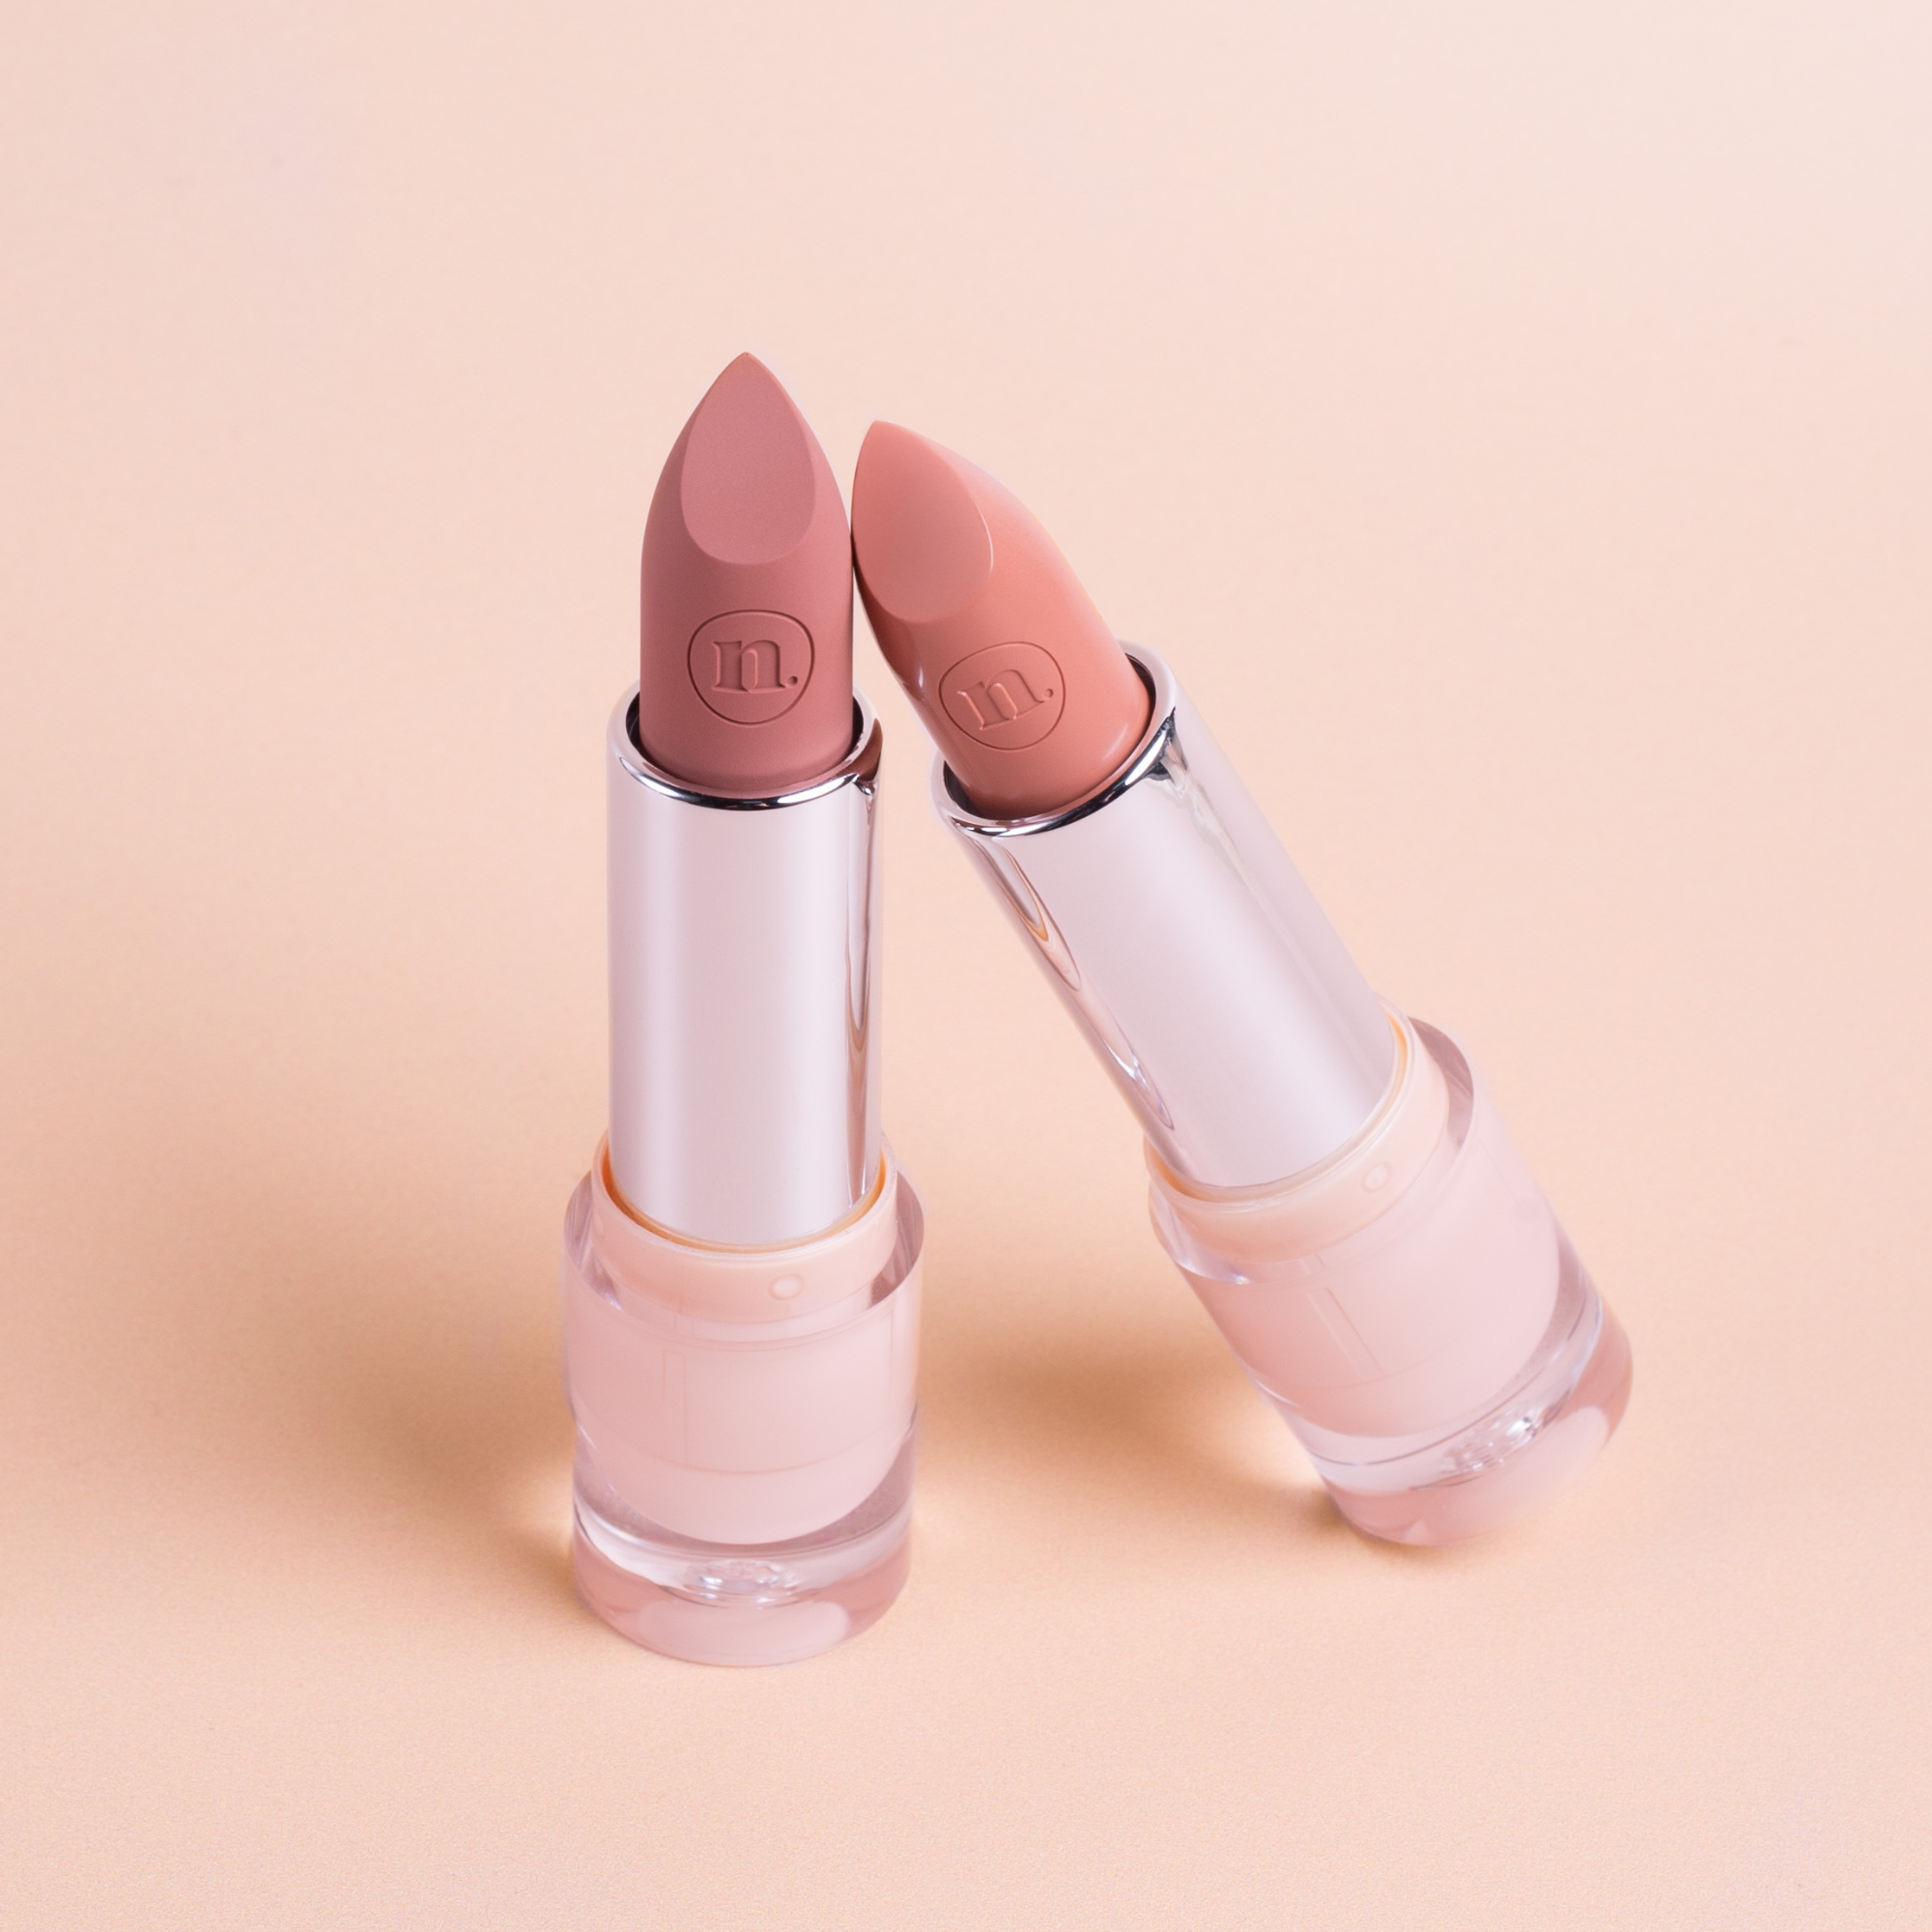  2 nude lipsticks purchased, the 3rd offered